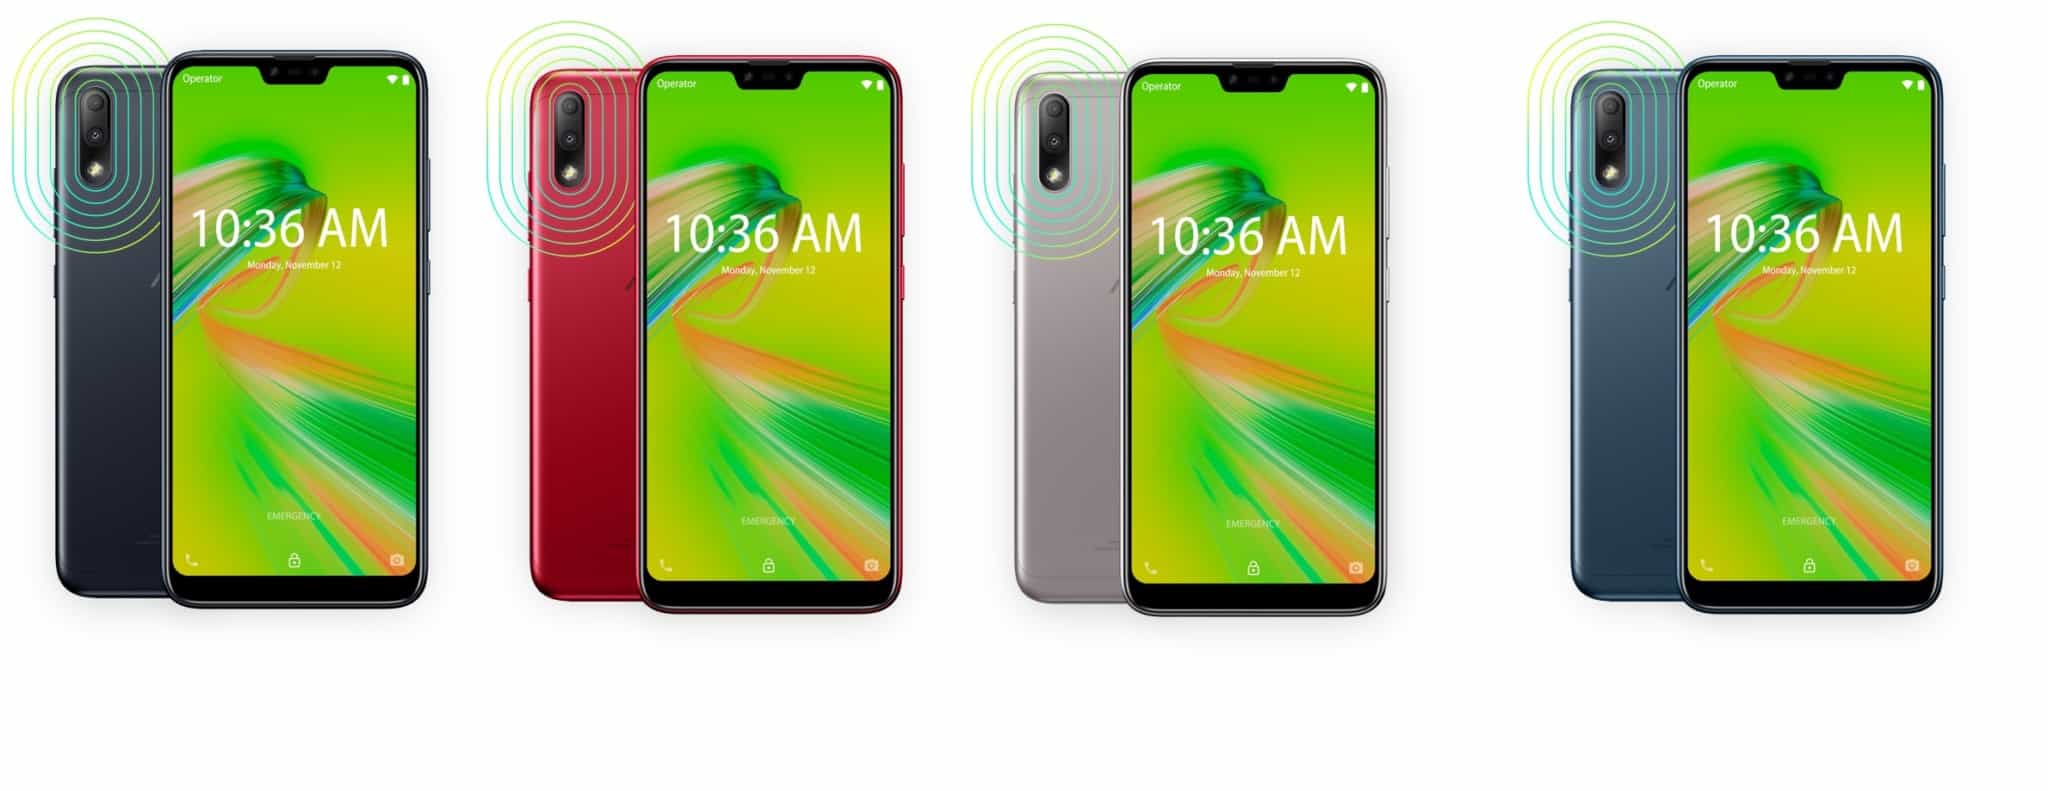 Asus zenfone max shot and max plus m2 reported, first smartphones fueled by qualcomm snapdragon sip 1